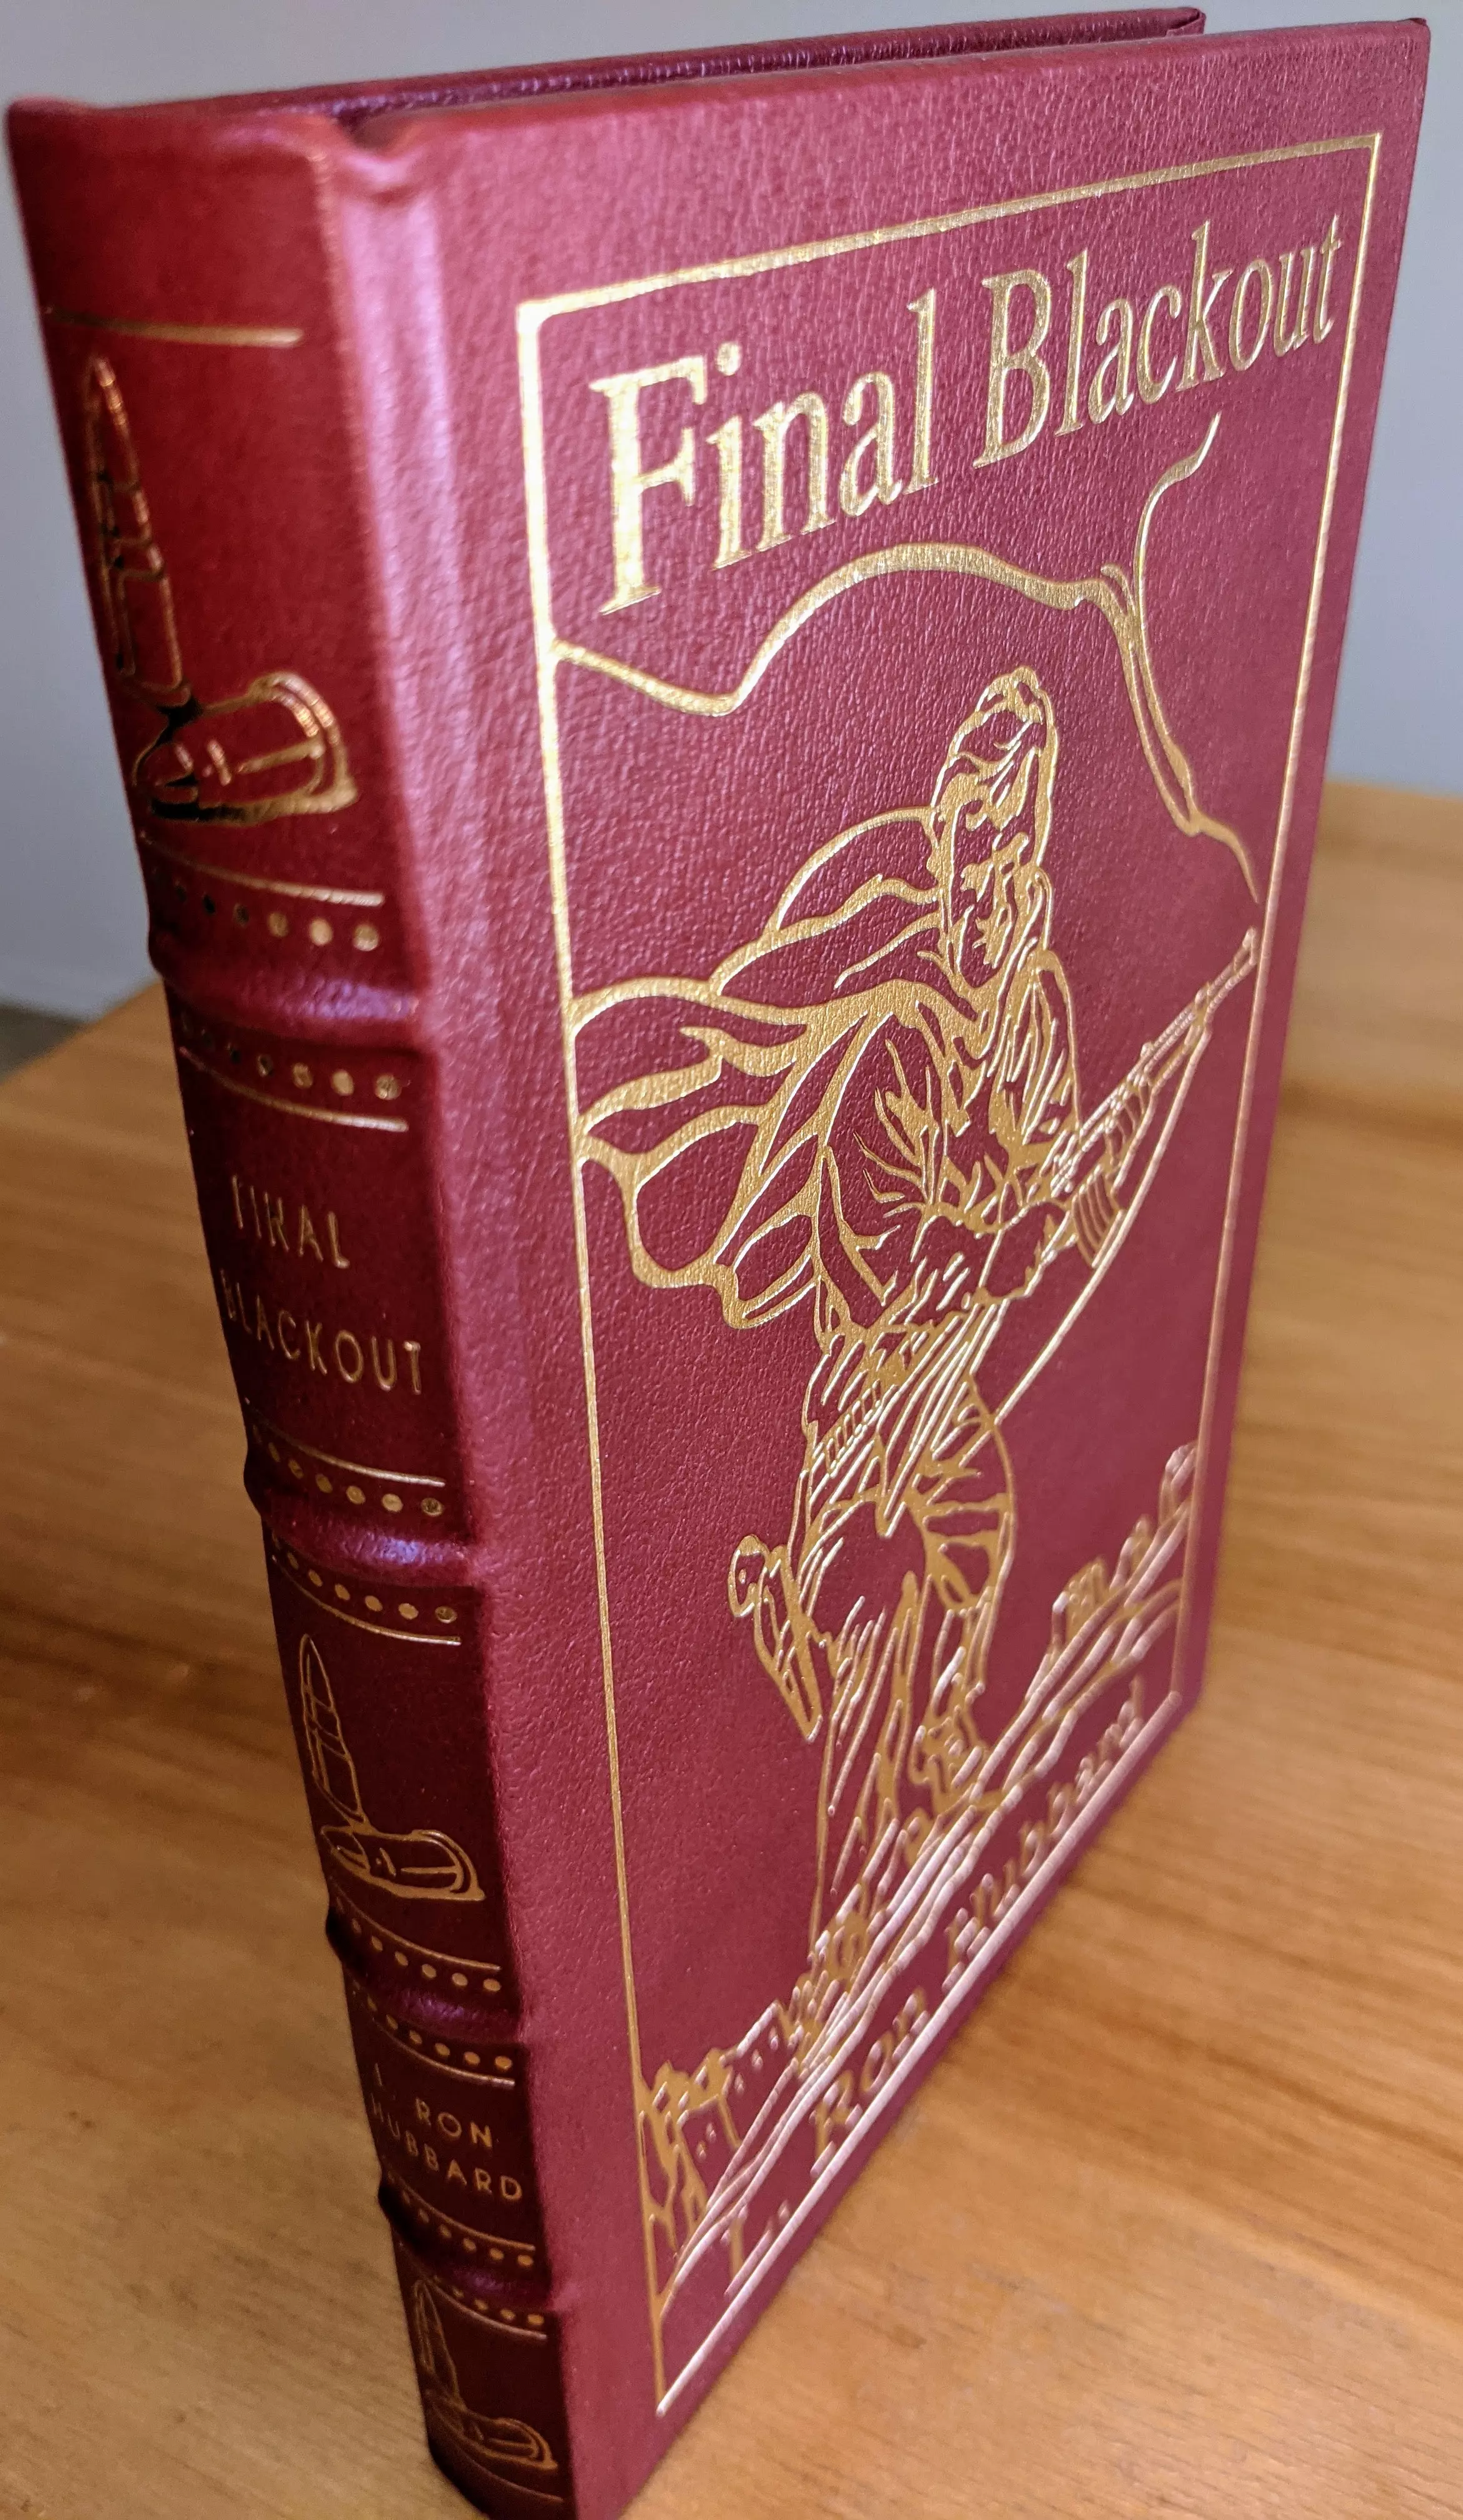 Stunning Red Leather Bound hardback book with hubbed spine, cover artwork in 22kt gold, printed on archival paper with gold gilded edges, smyth sewing & concealed muslin joints
	  - original artwork by L. Ron Hubbard Library